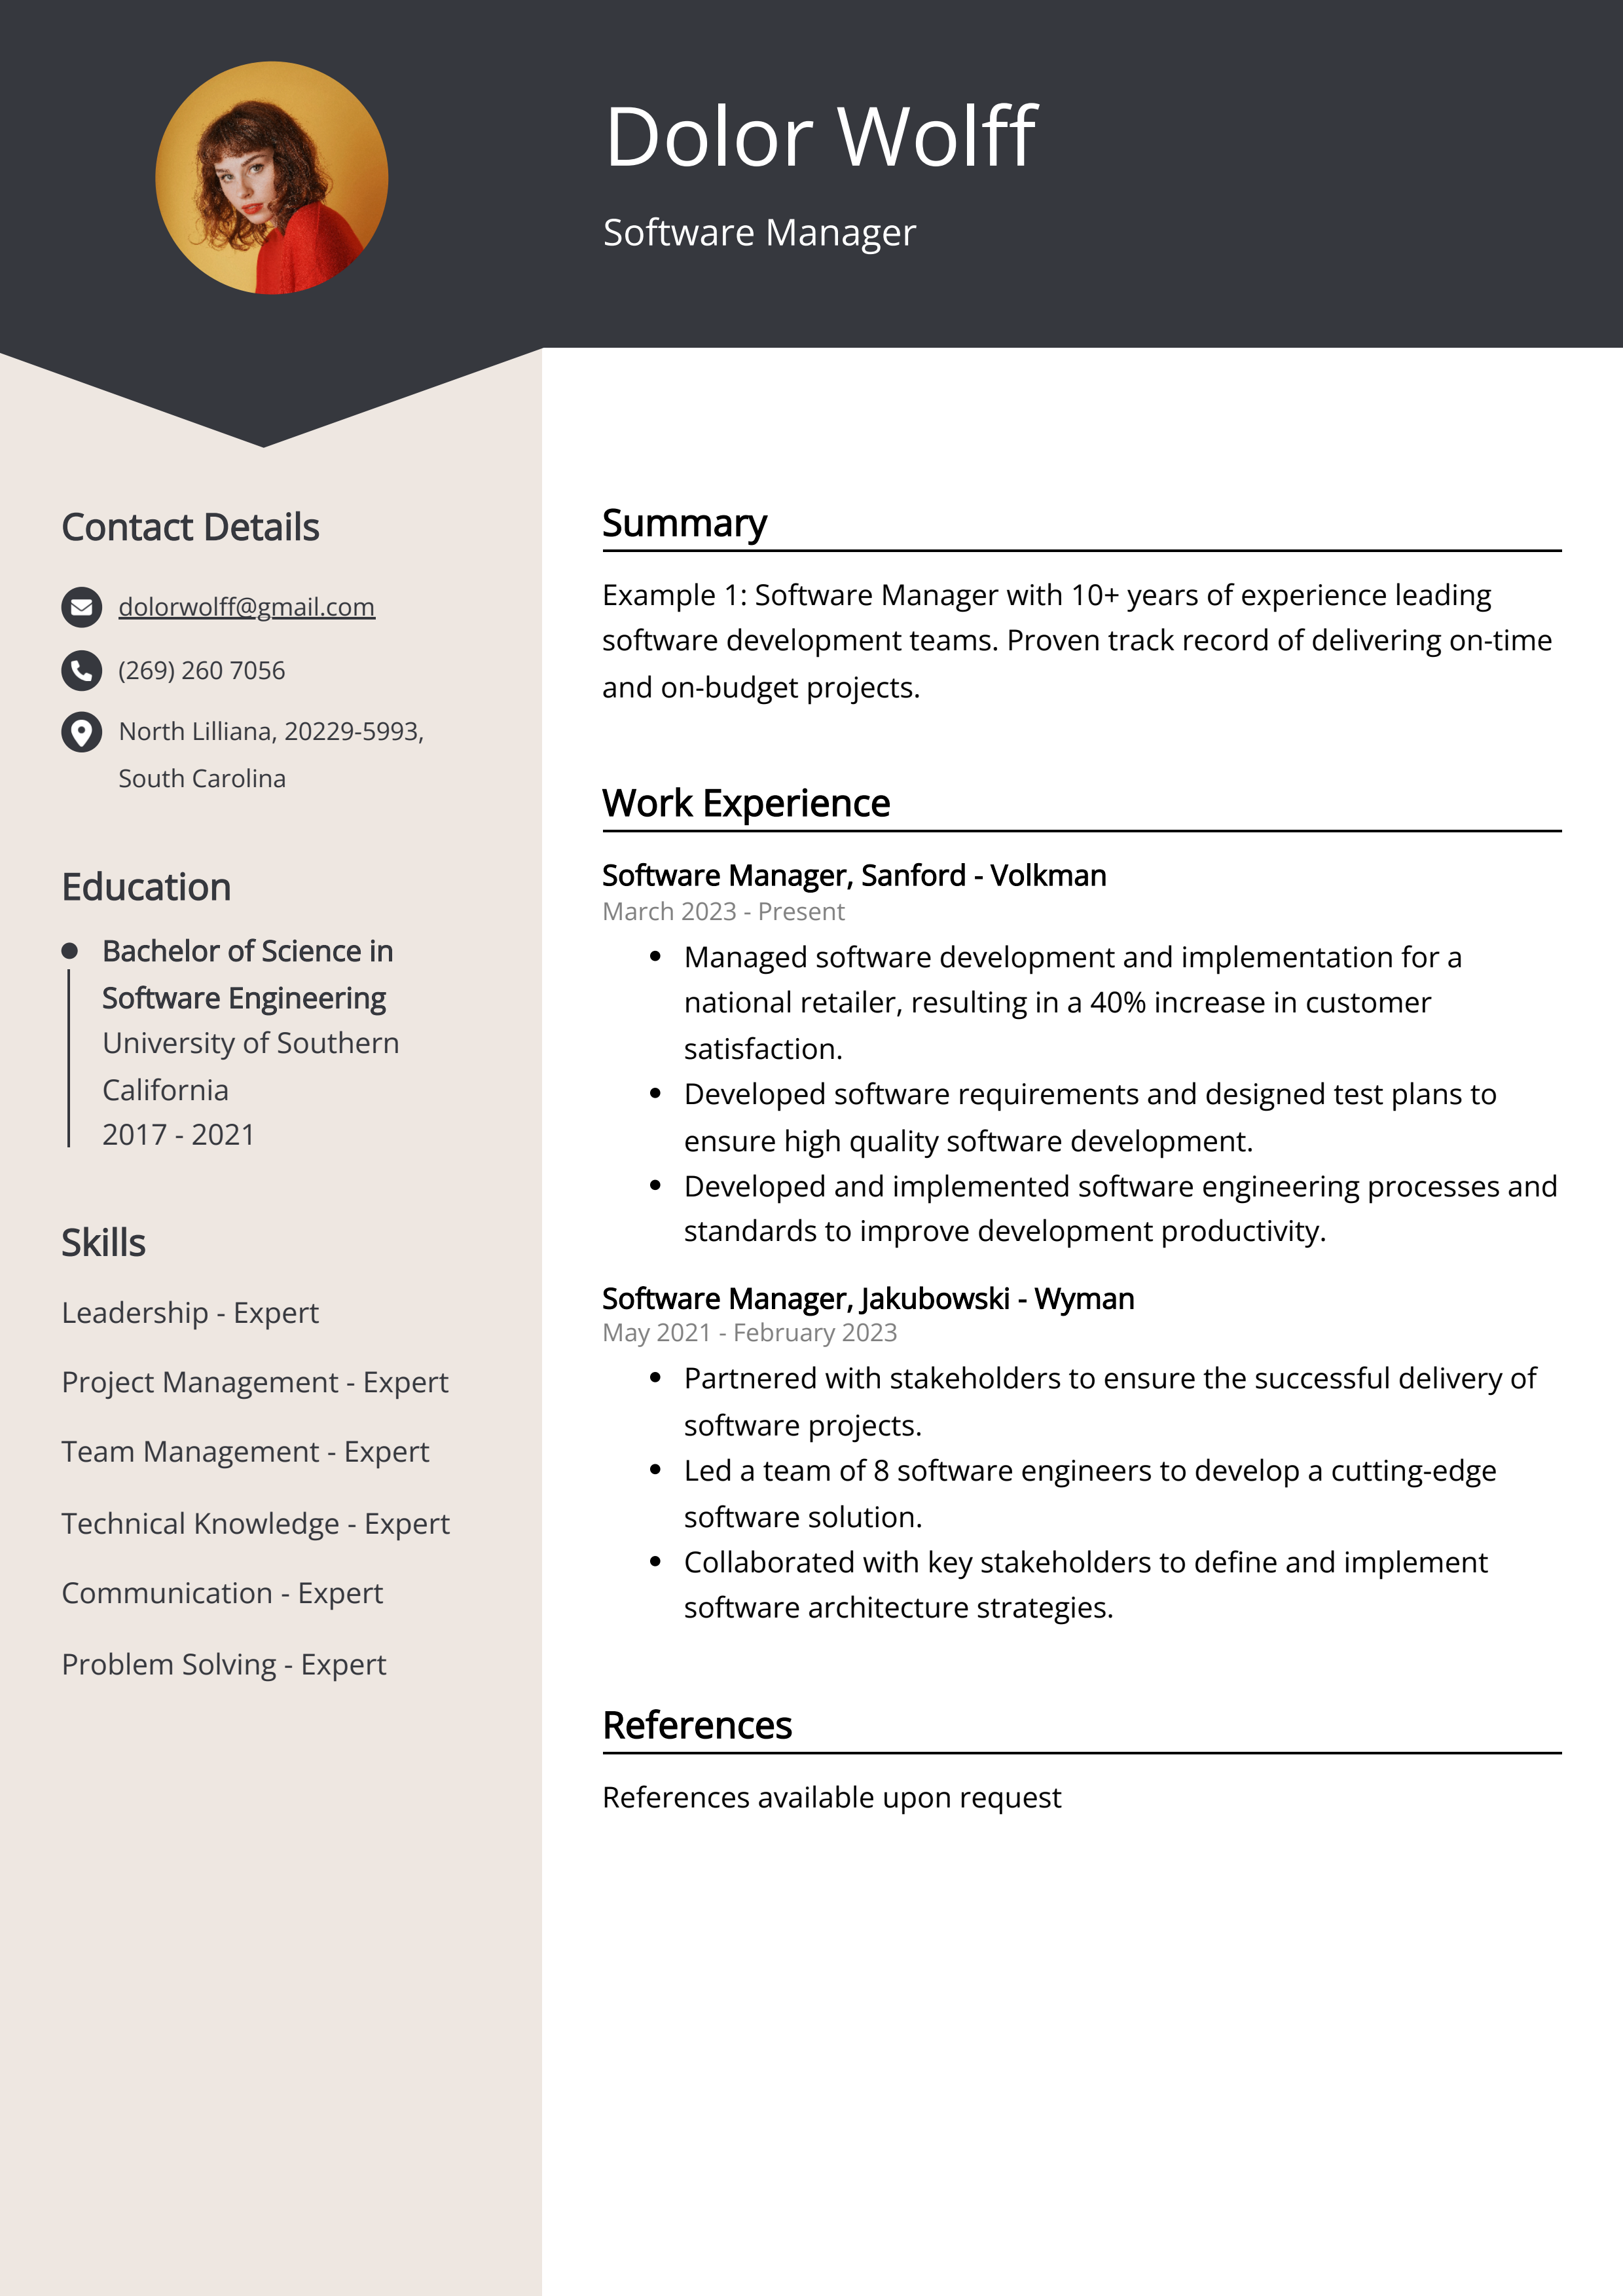 Software Manager CV Example